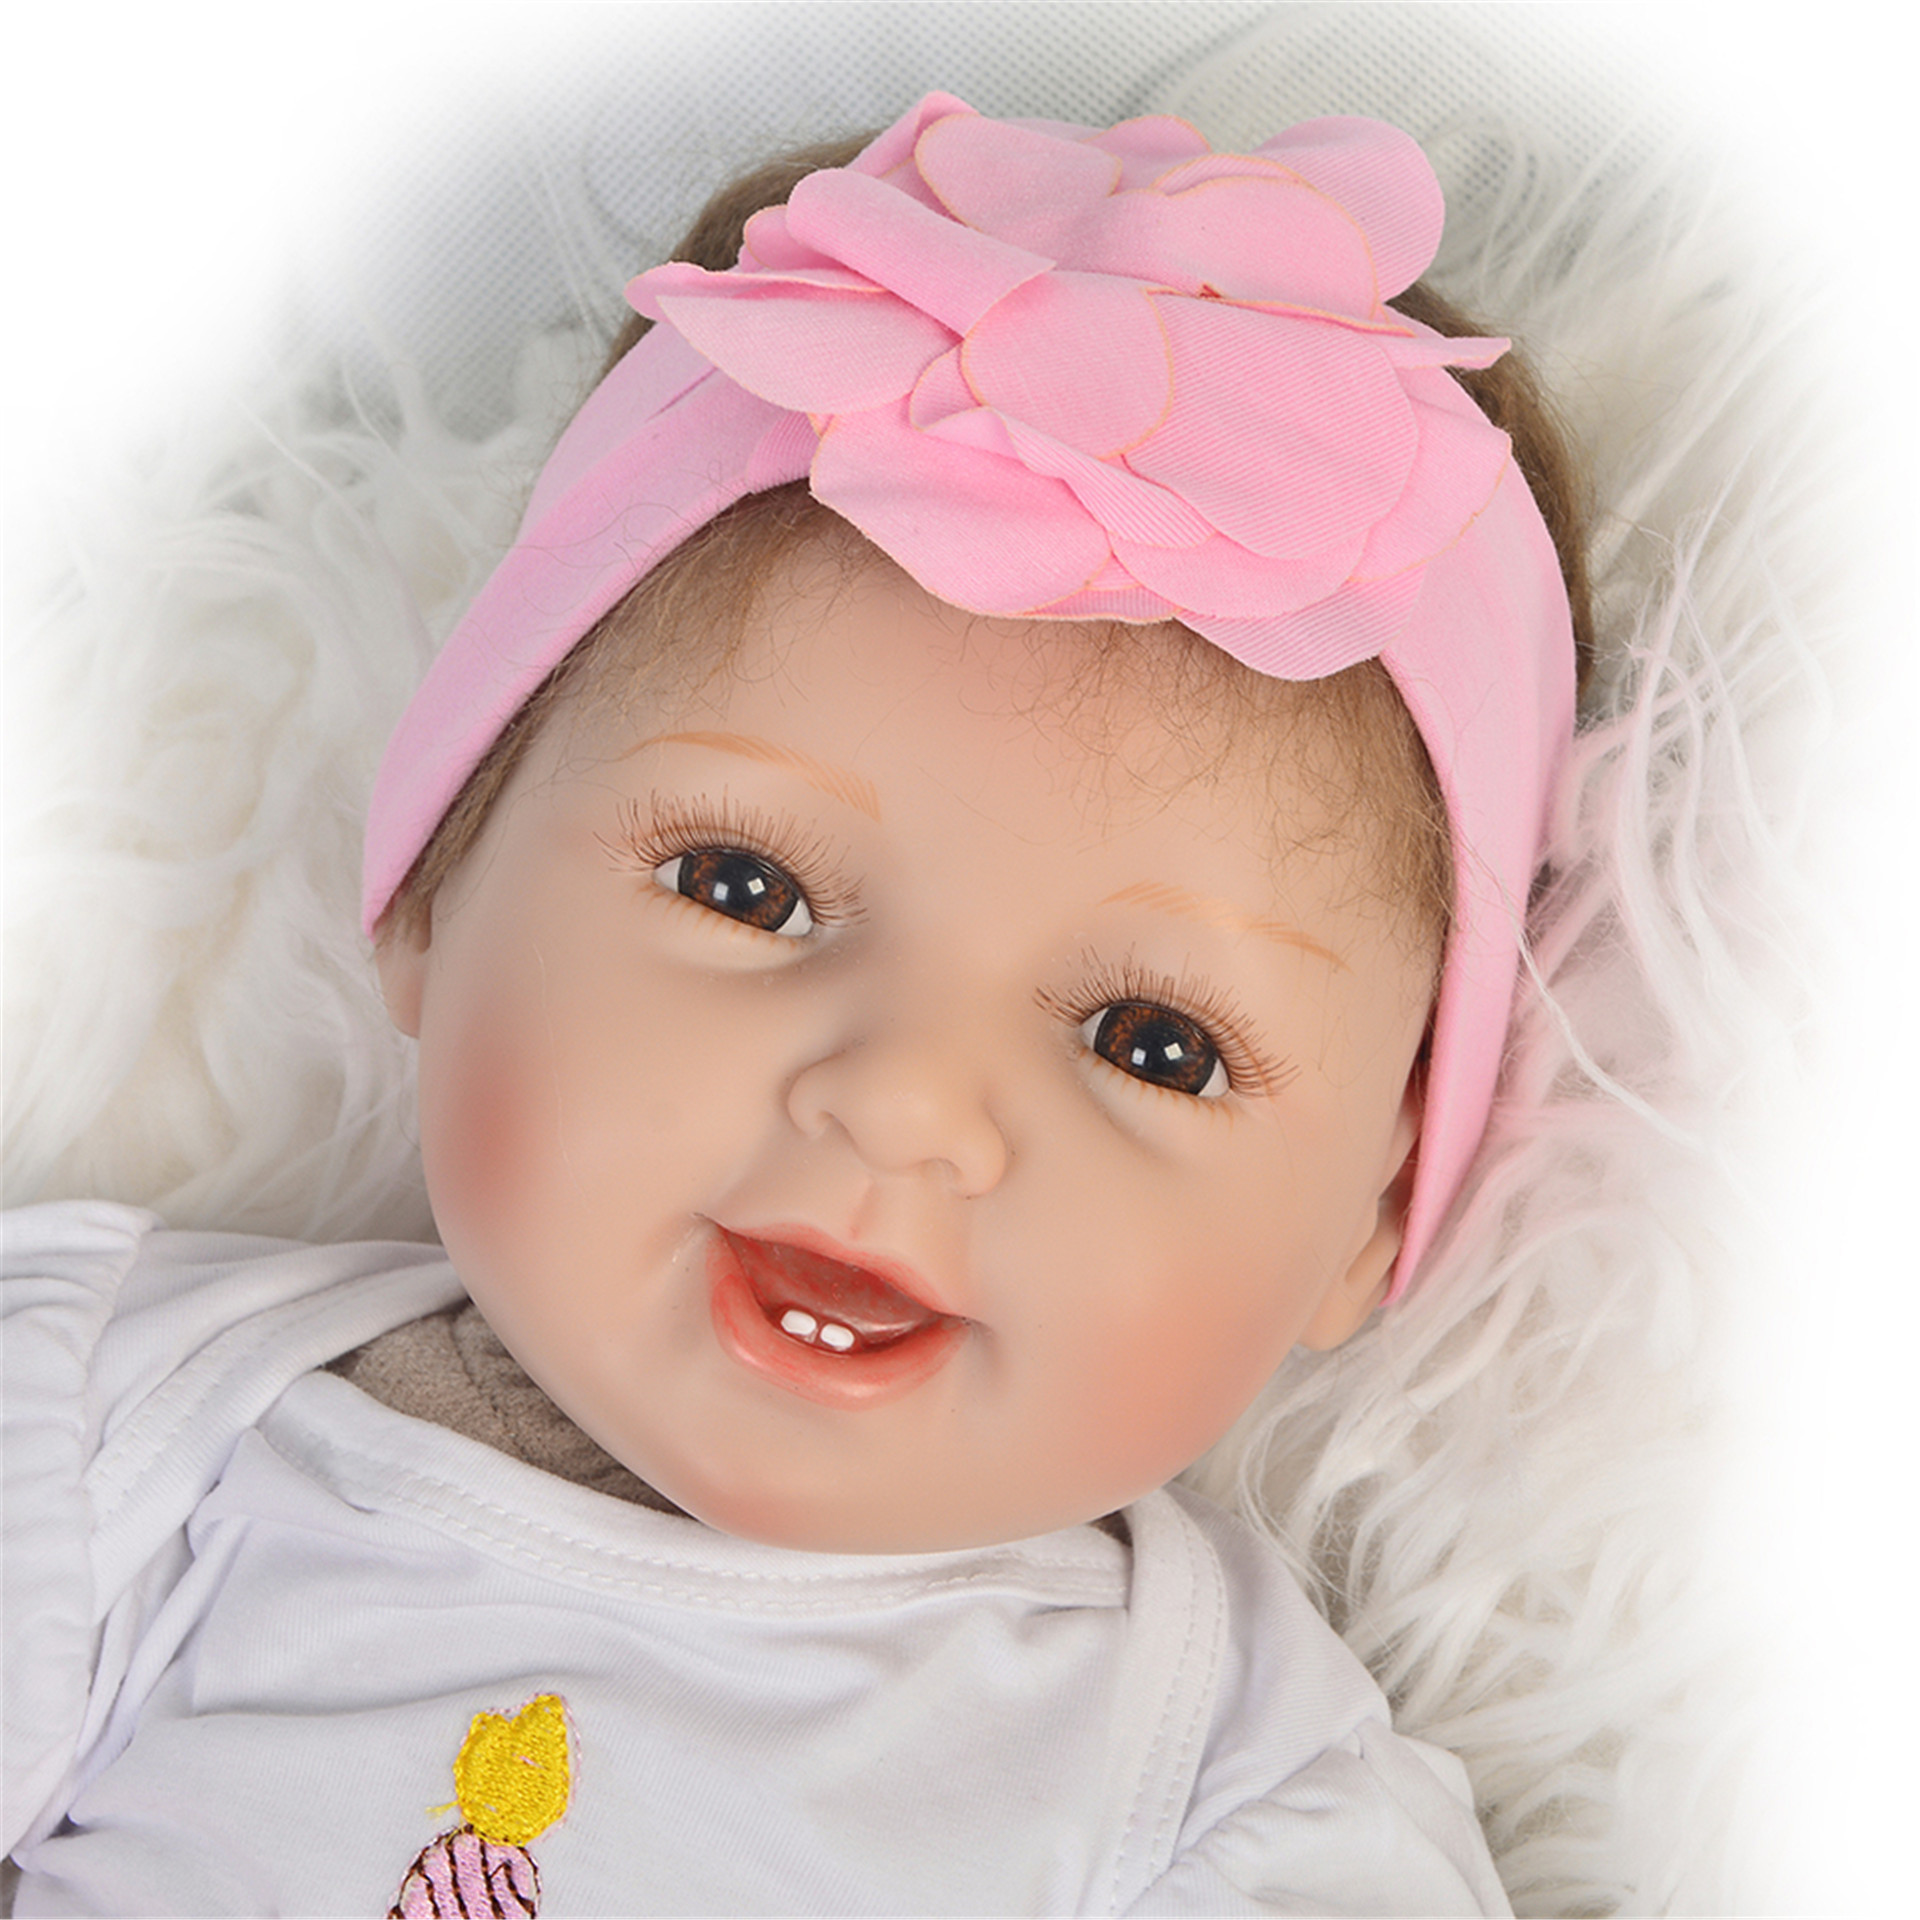 Realistic Reborn Baby Dolls Best Gifts for Toddlers - World Reborn Doll